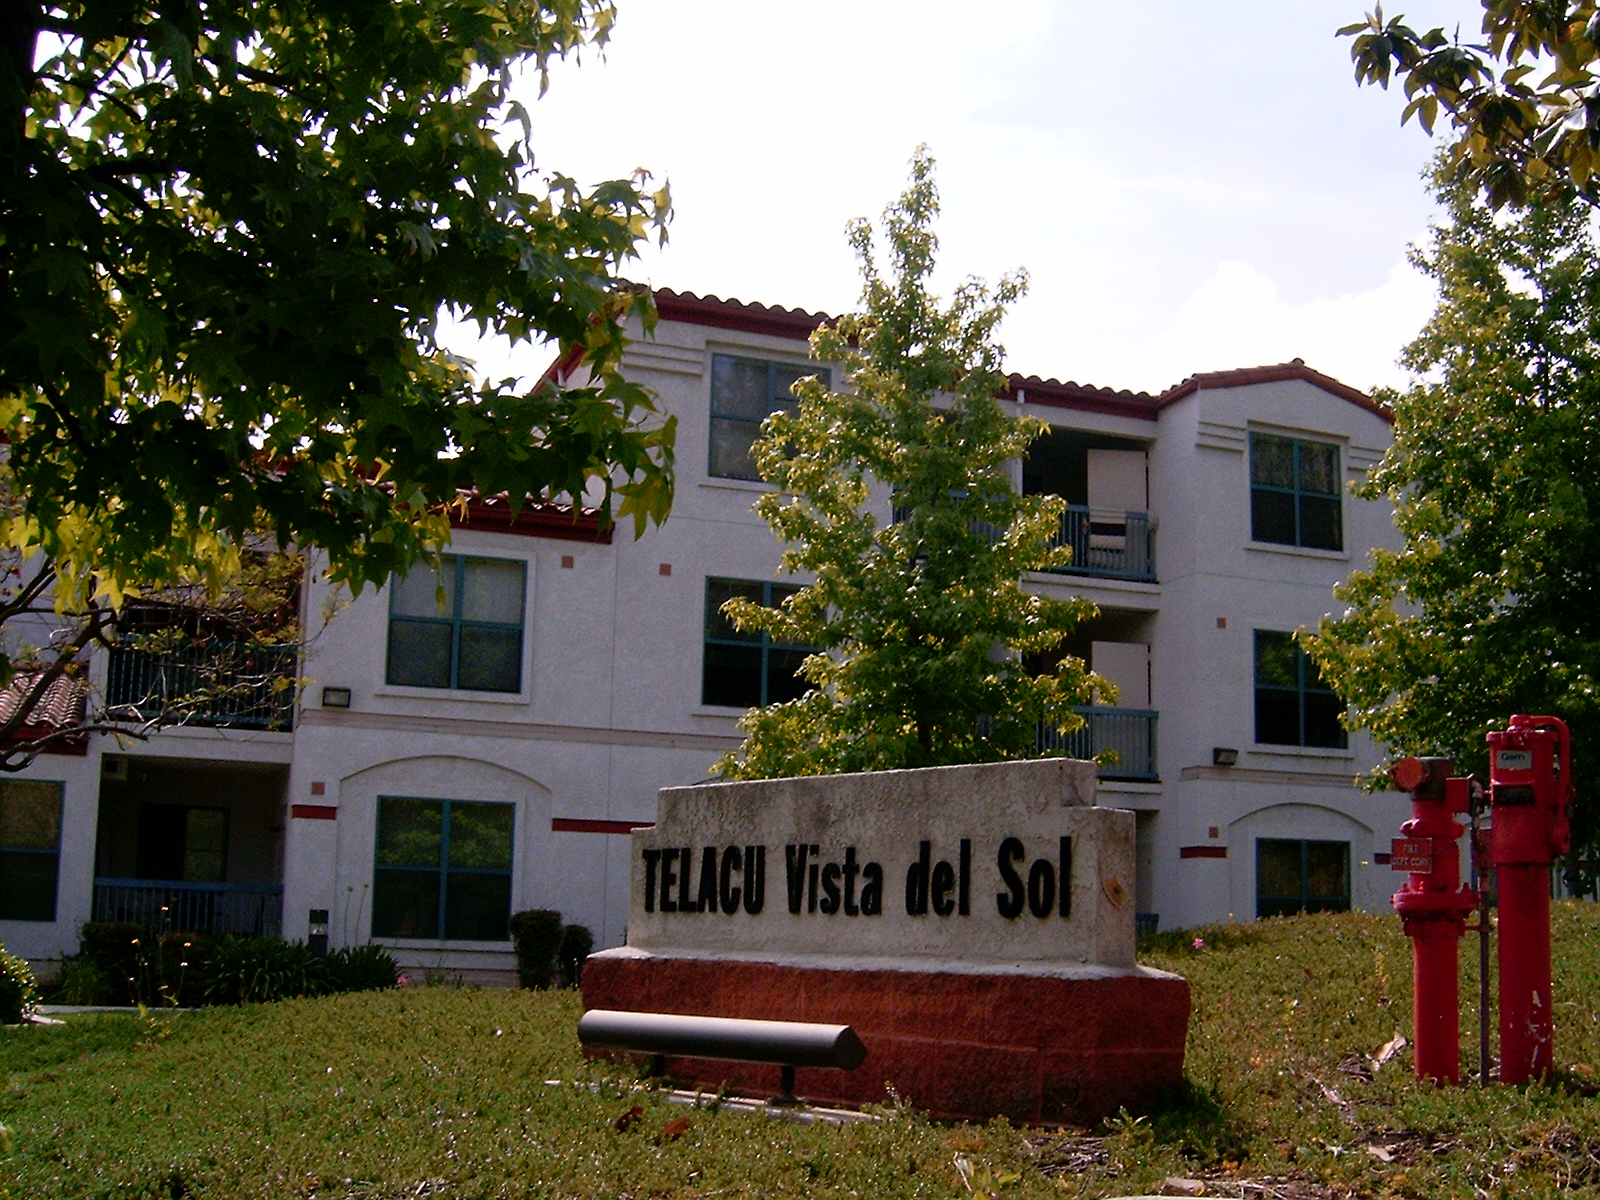 Three story building, trees around the building, standing wall with the building's name, Telacu Vista del Sol, fire hydrants.